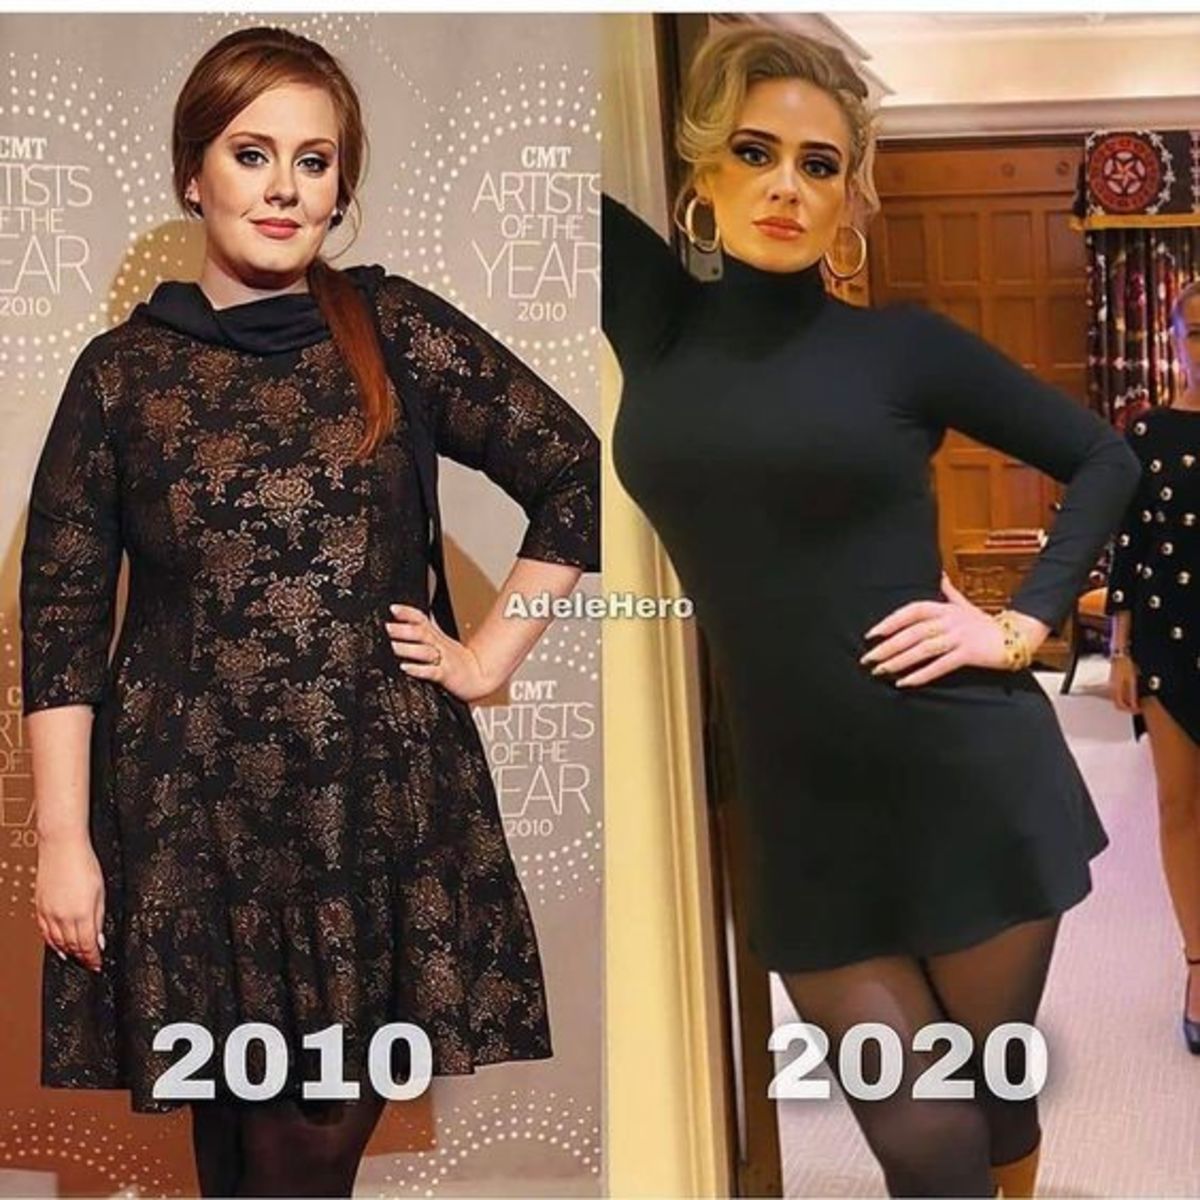 How to Lose Weight? Try the Sirtfood Diet that Adele Swears By